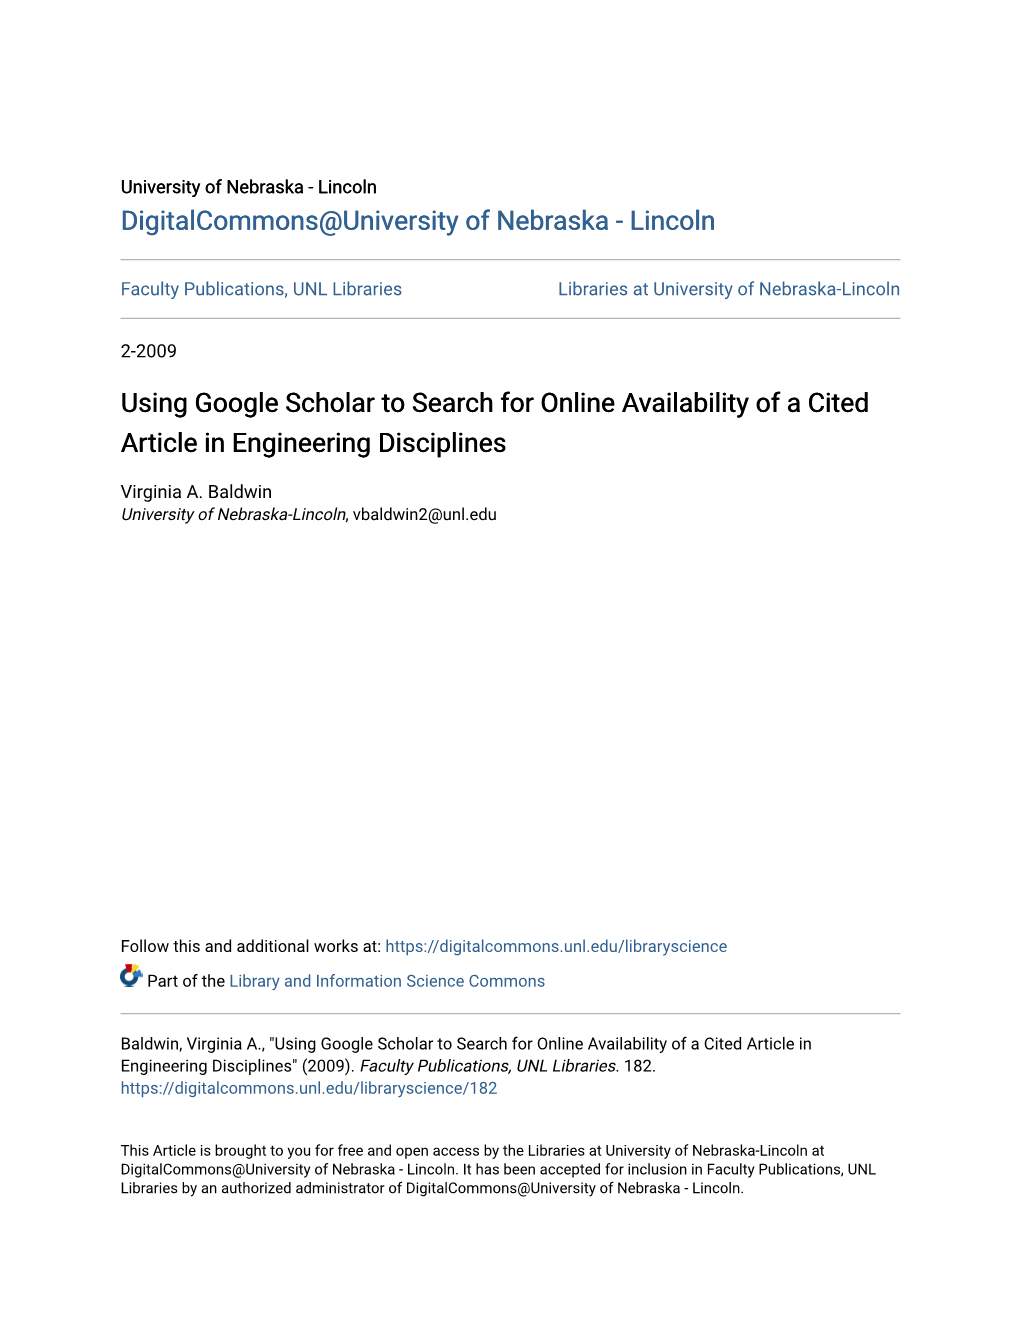 Using Google Scholar to Search for Online Availability of a Cited Article in Engineering Disciplines